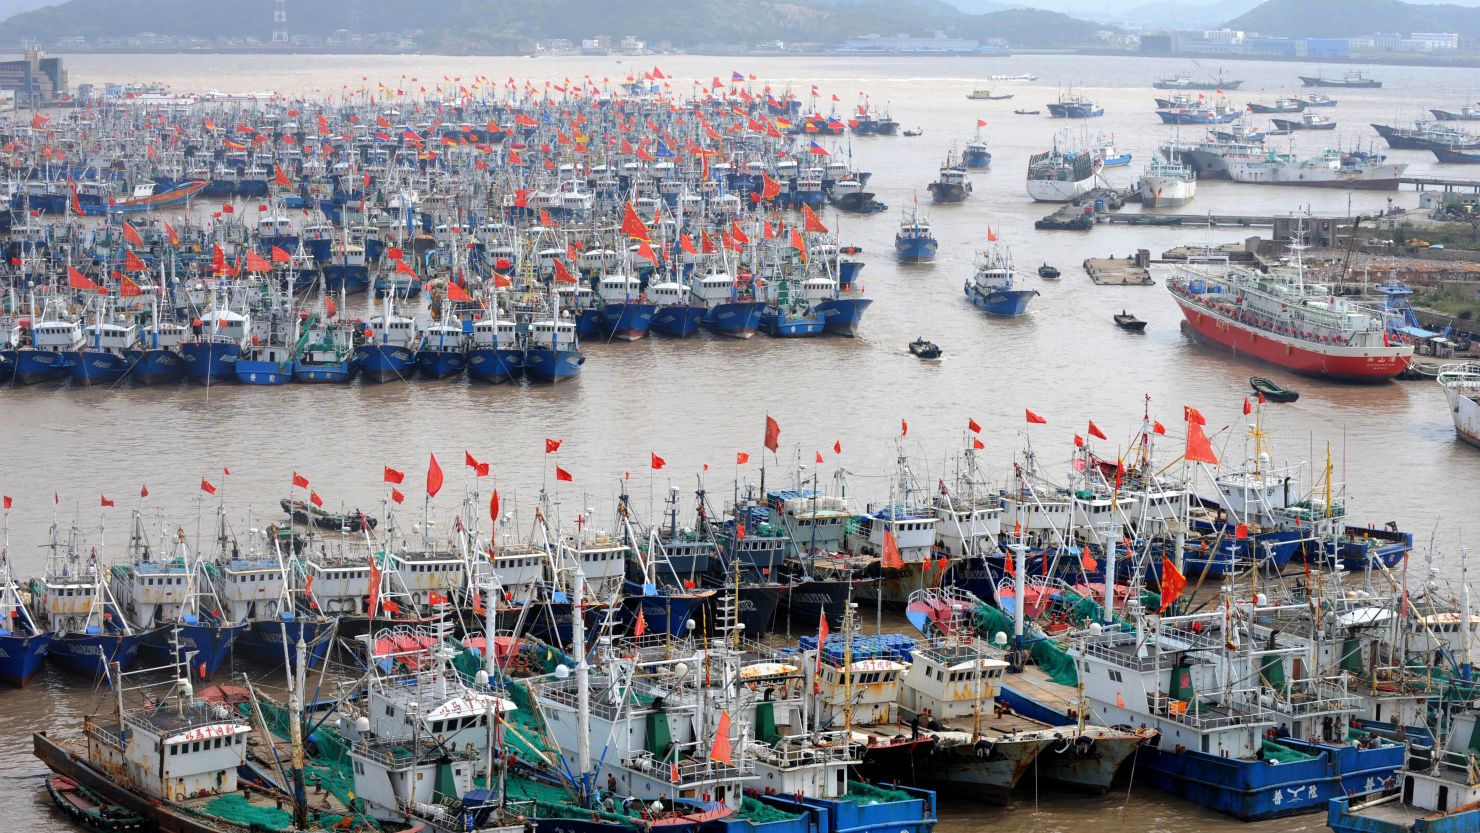 Fishing boats berth in Zhoushan port to avoid the powerful typhoon Fitow in Zhoushan, in east China's Zhejiang province on October 5, 2013.